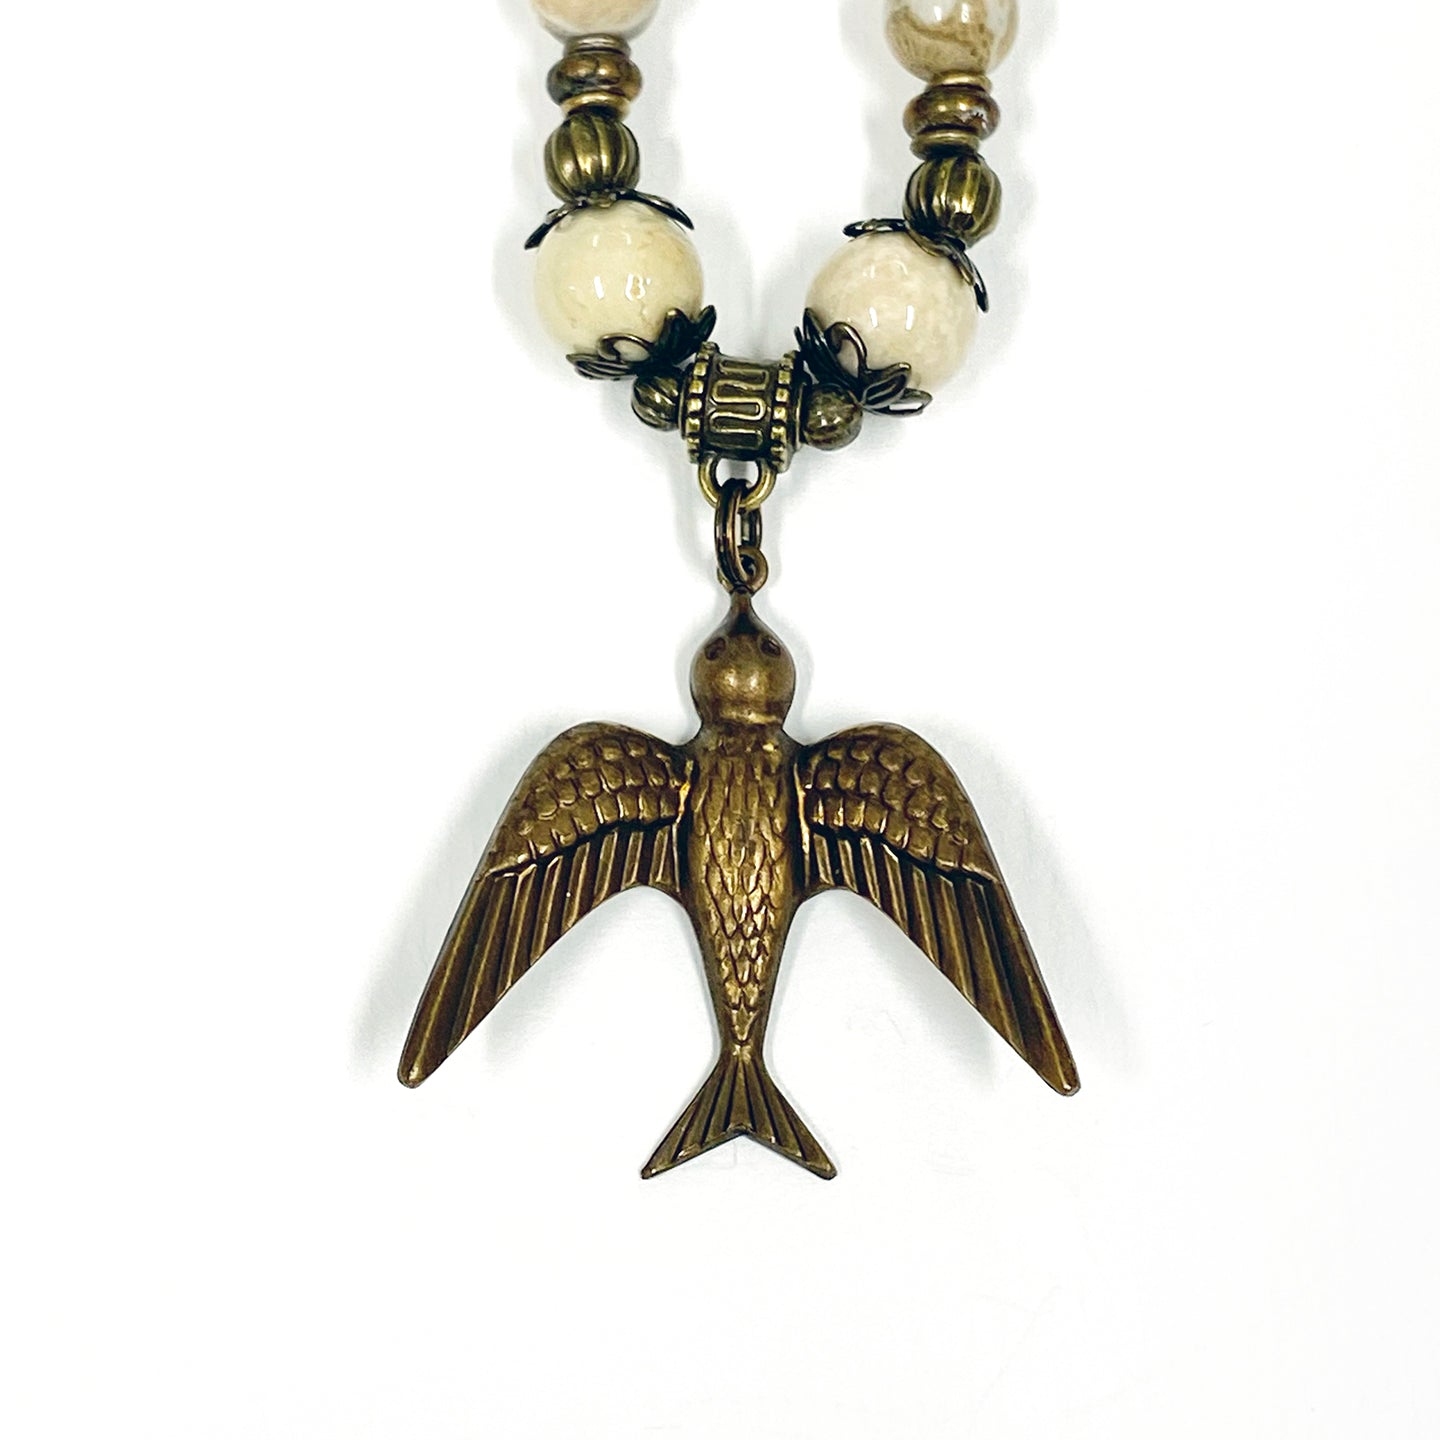 Petoskey Stone Necklace by Michigan artist Janice Copperstone featuring a hummingbird pendant.